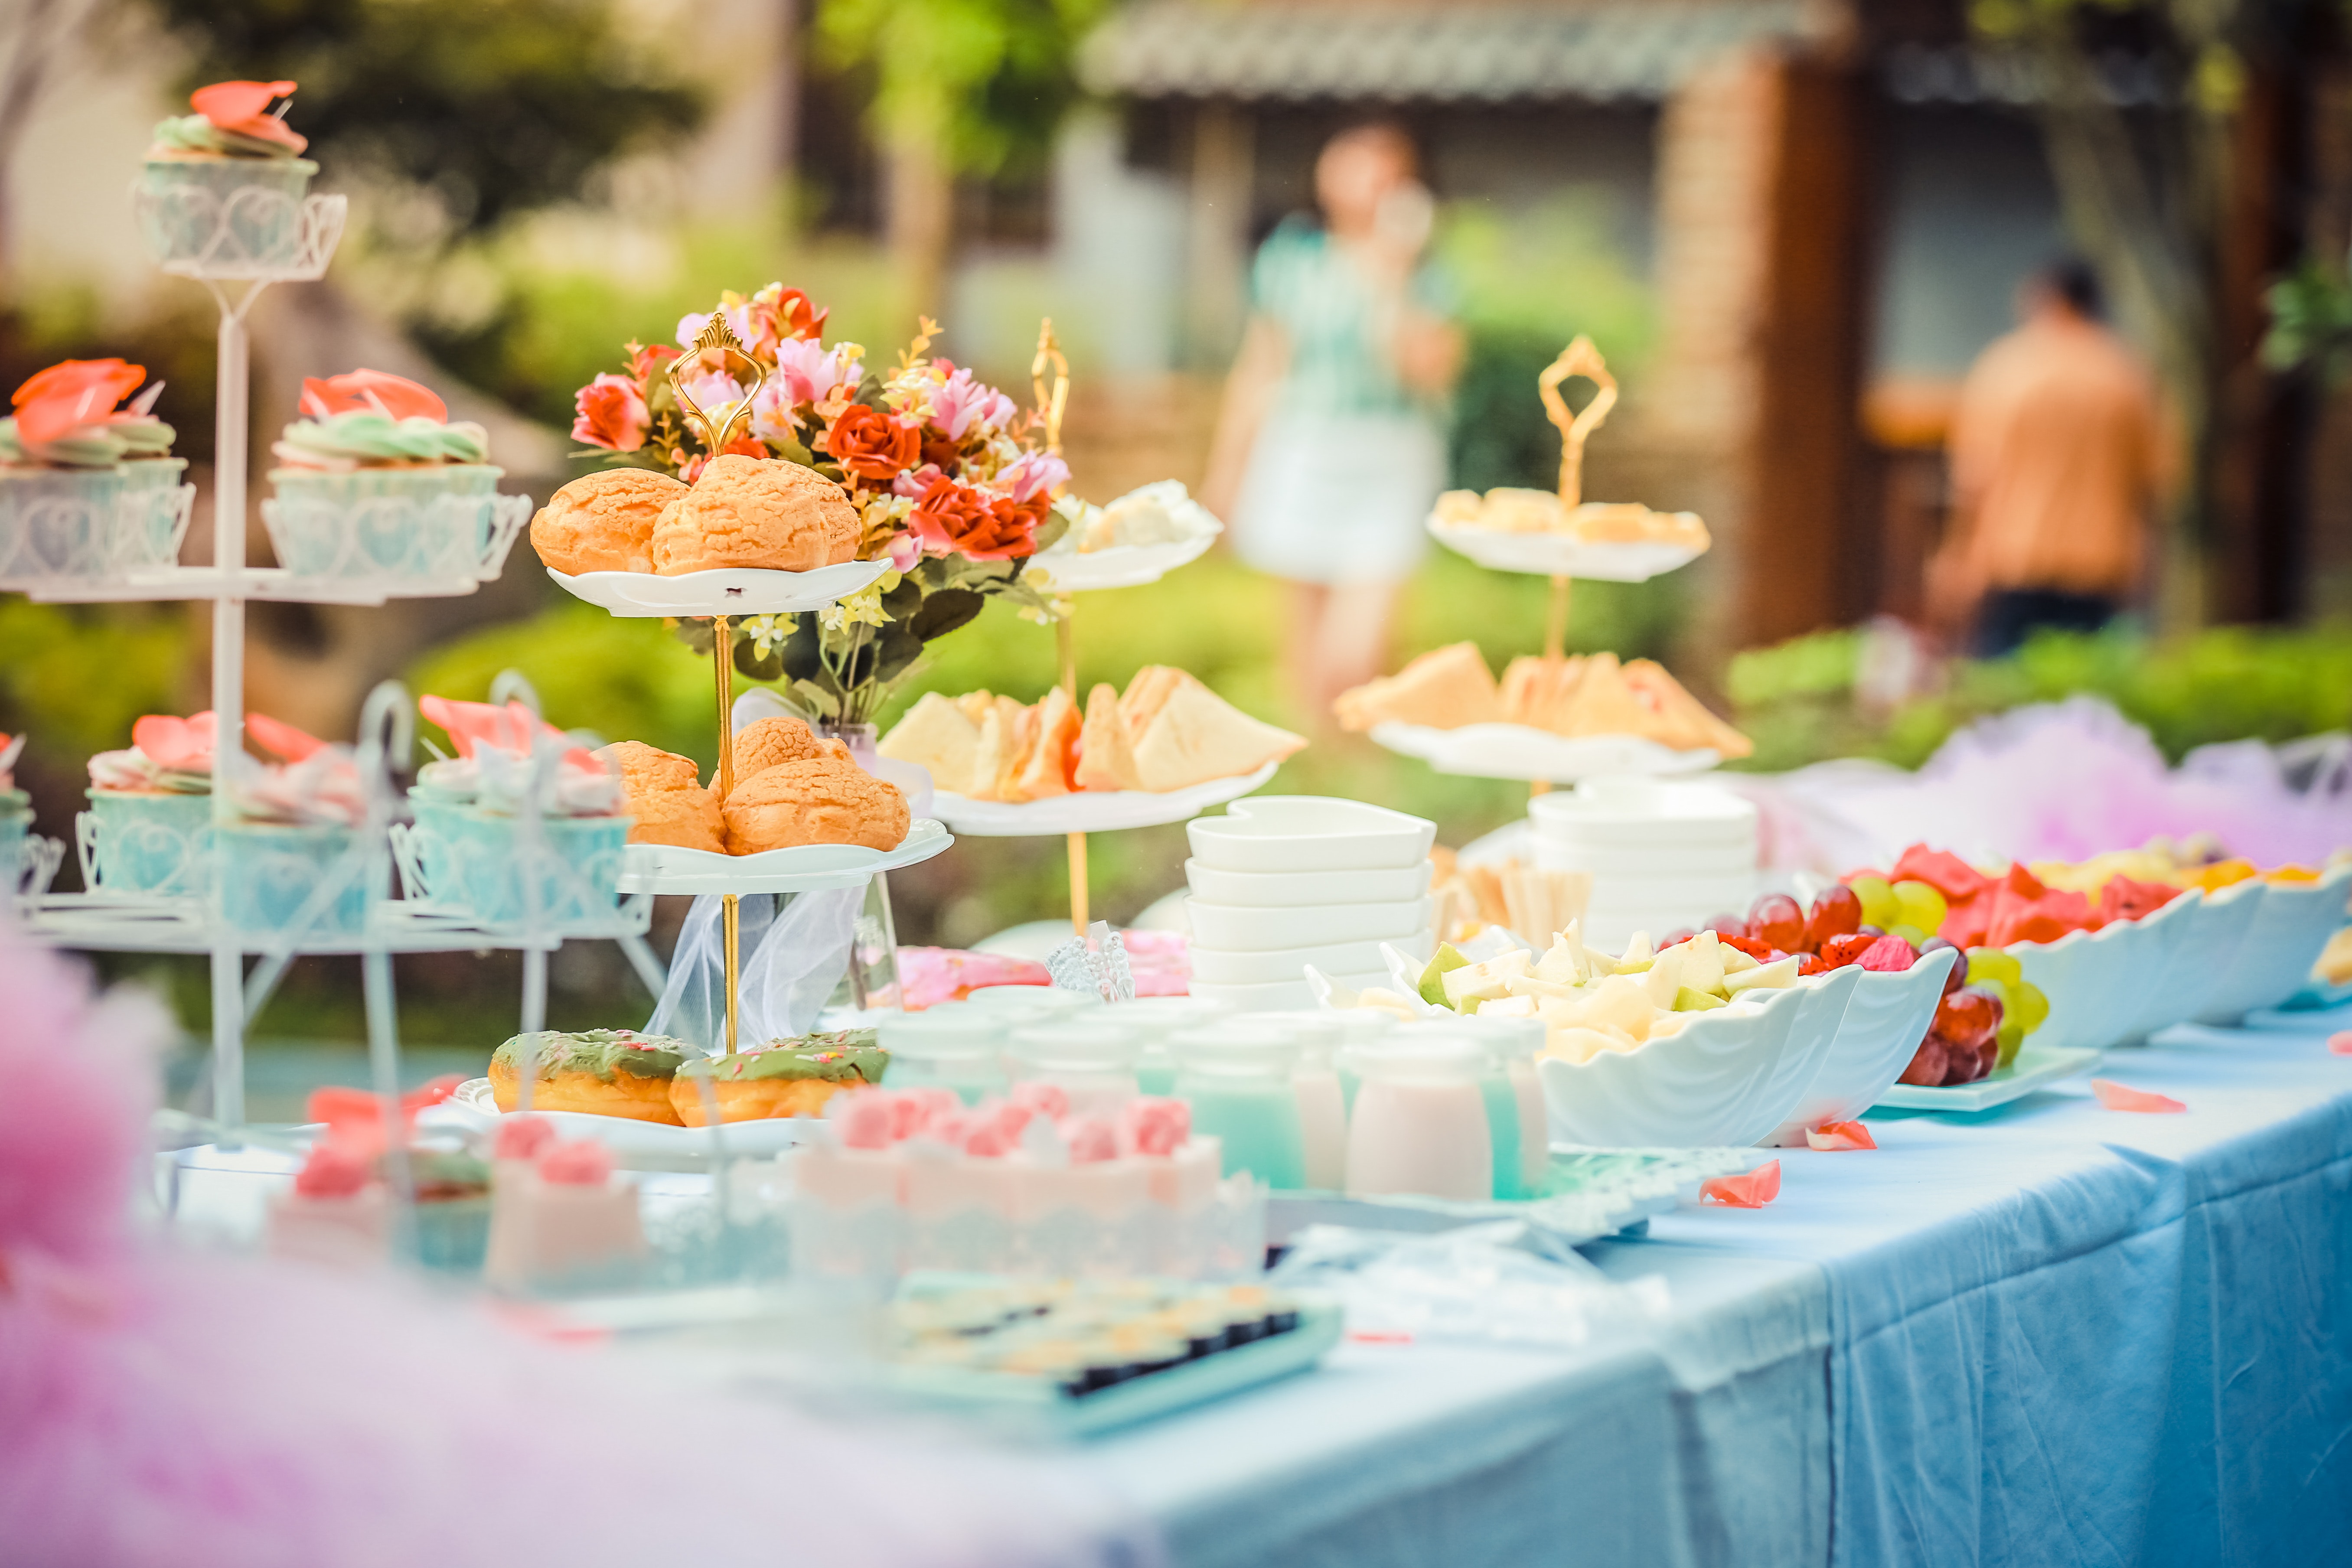 New Trends in Sustainability For Your Wedding Buffet